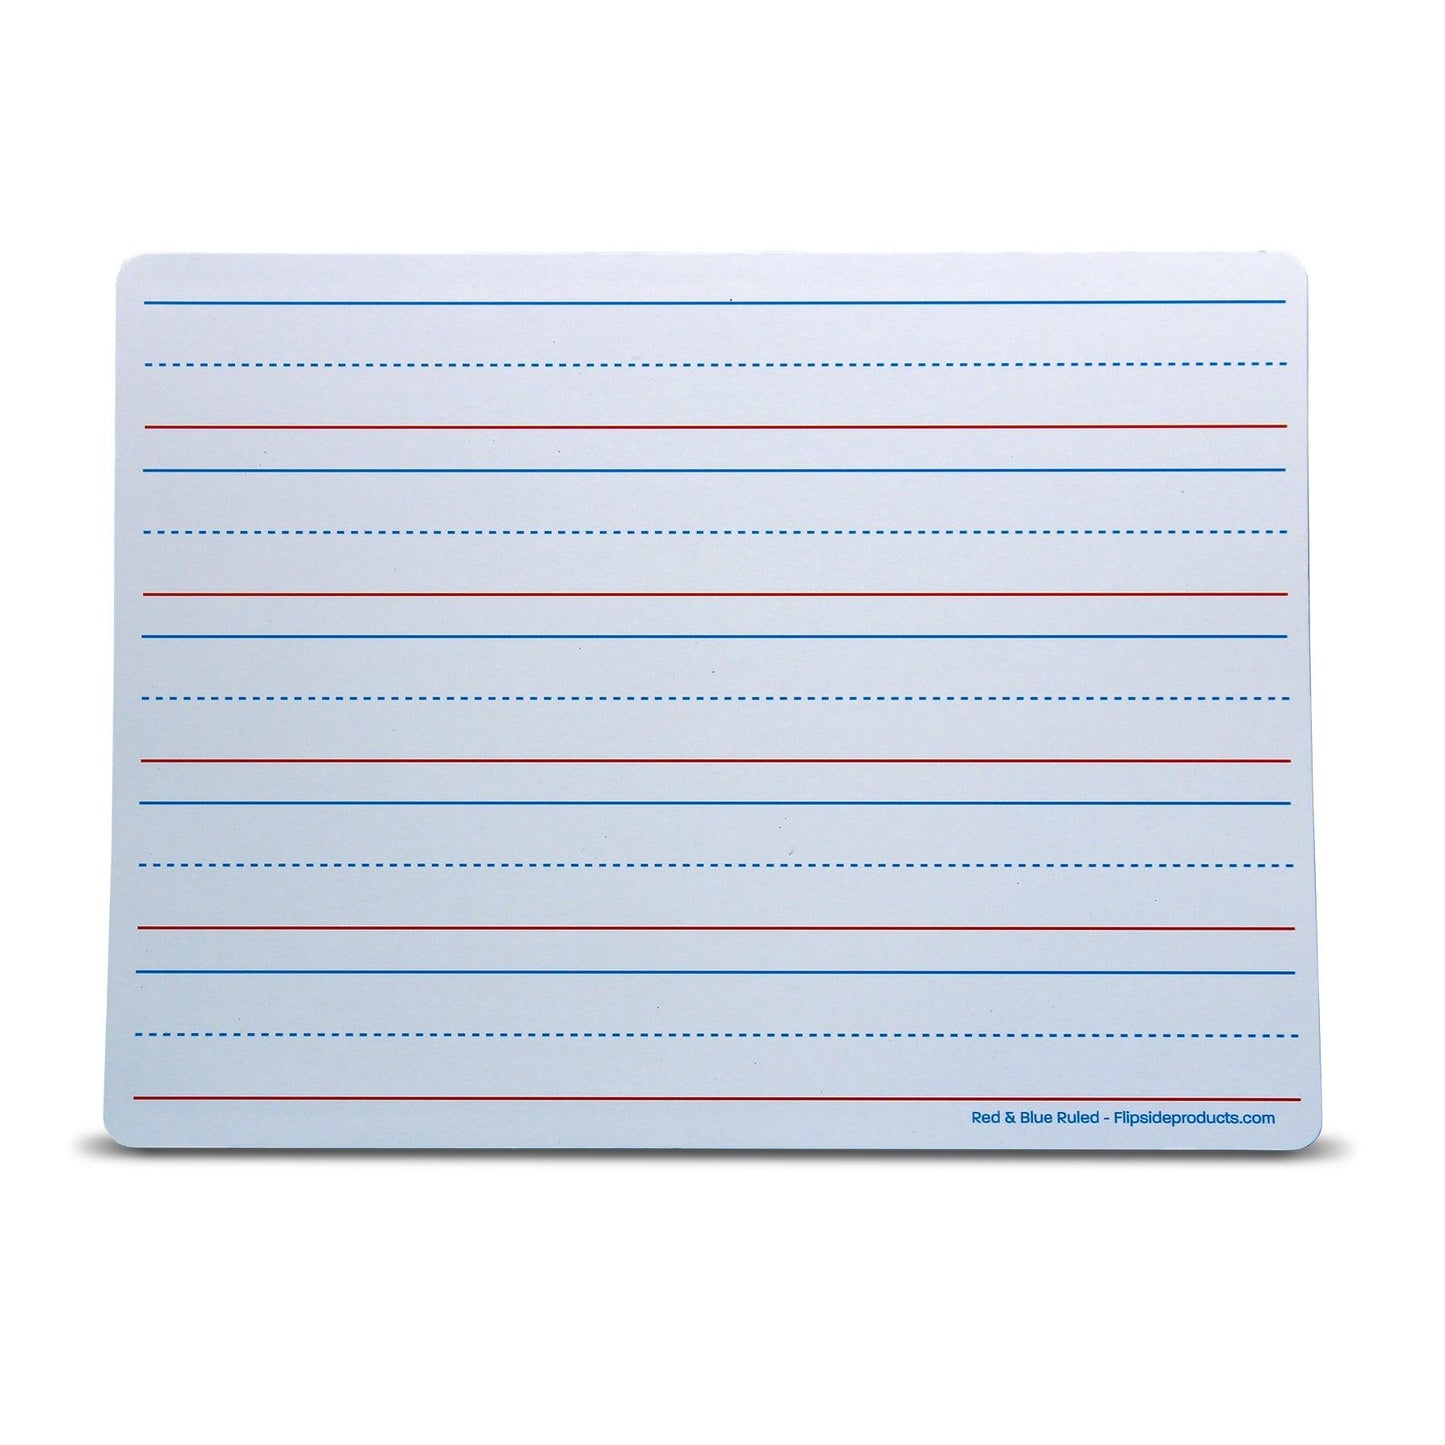 Magnetic Dry Erase Learning Mat, Two-Sided Red & Blue Ruled/Plain, 9" x 12", Pack of 12 - Loomini